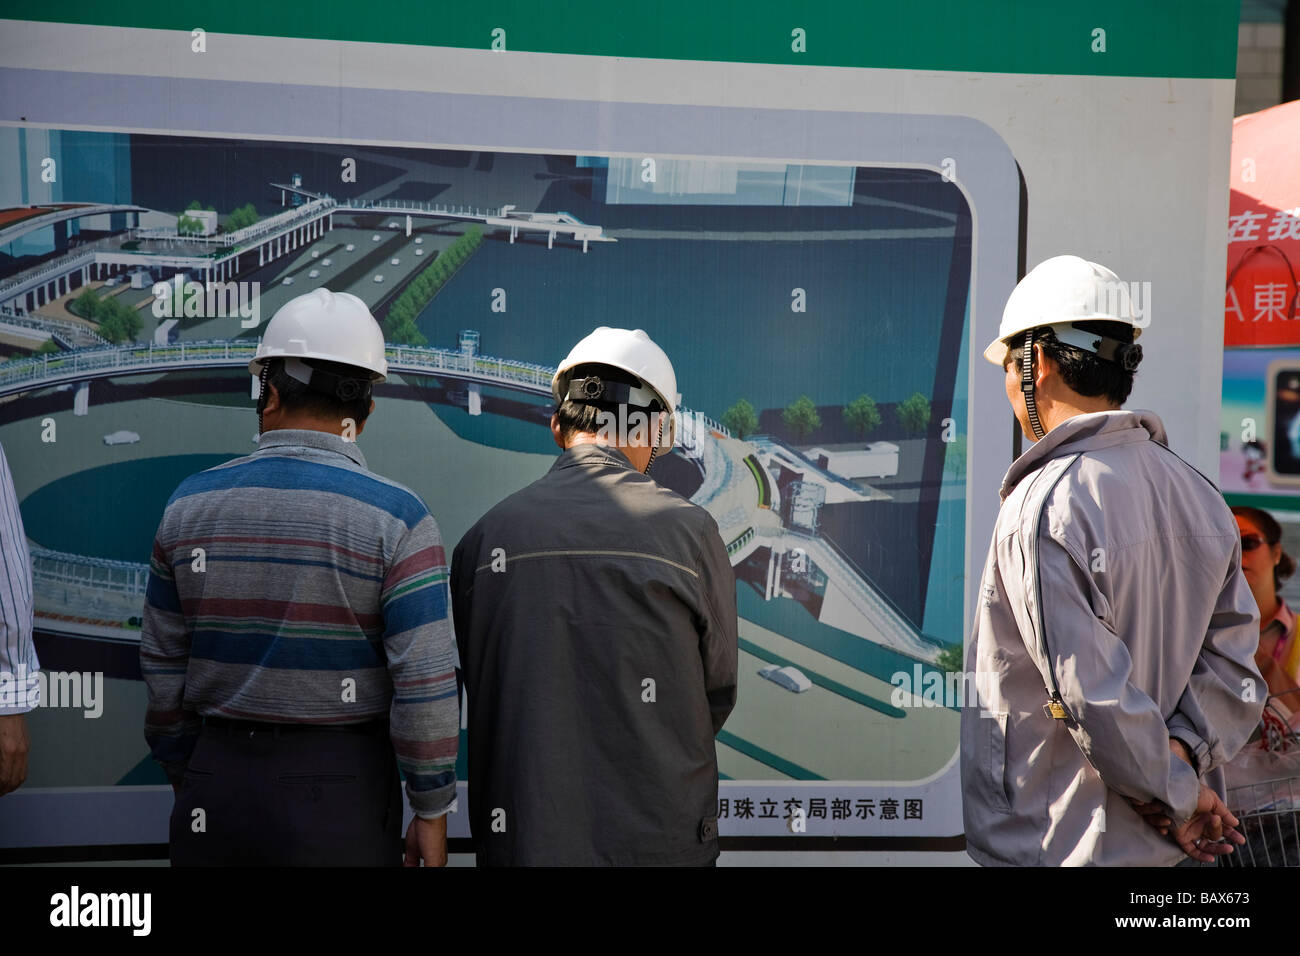 Construction engineers and surveyors in Shanghai China studying a plan. Stock Photo